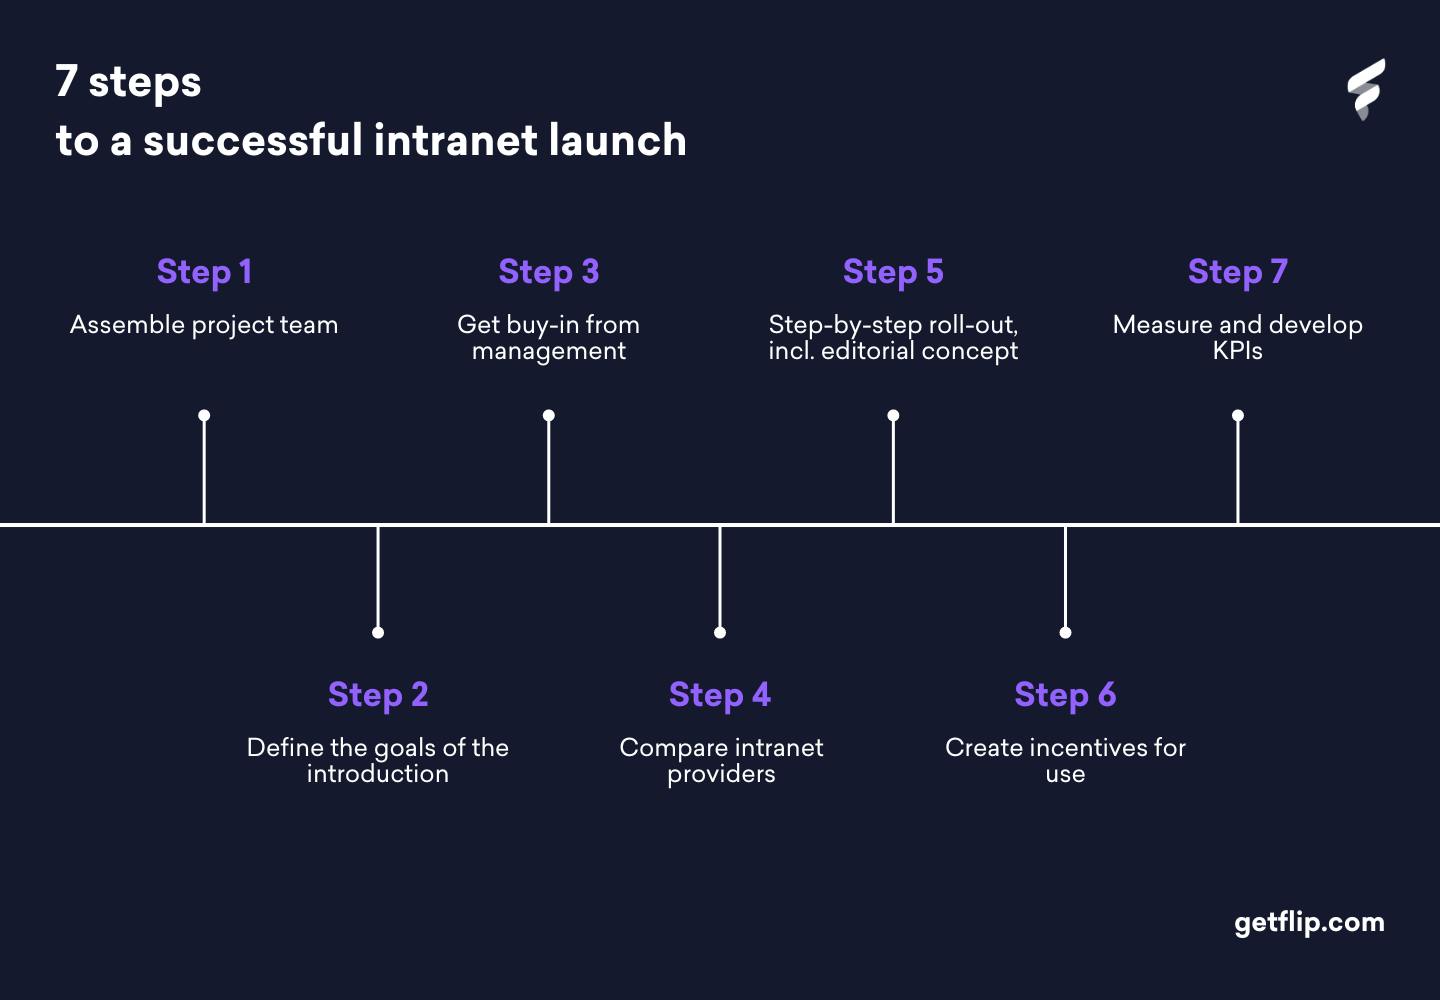 Successfully introduce a new intranet by following these 7 steps